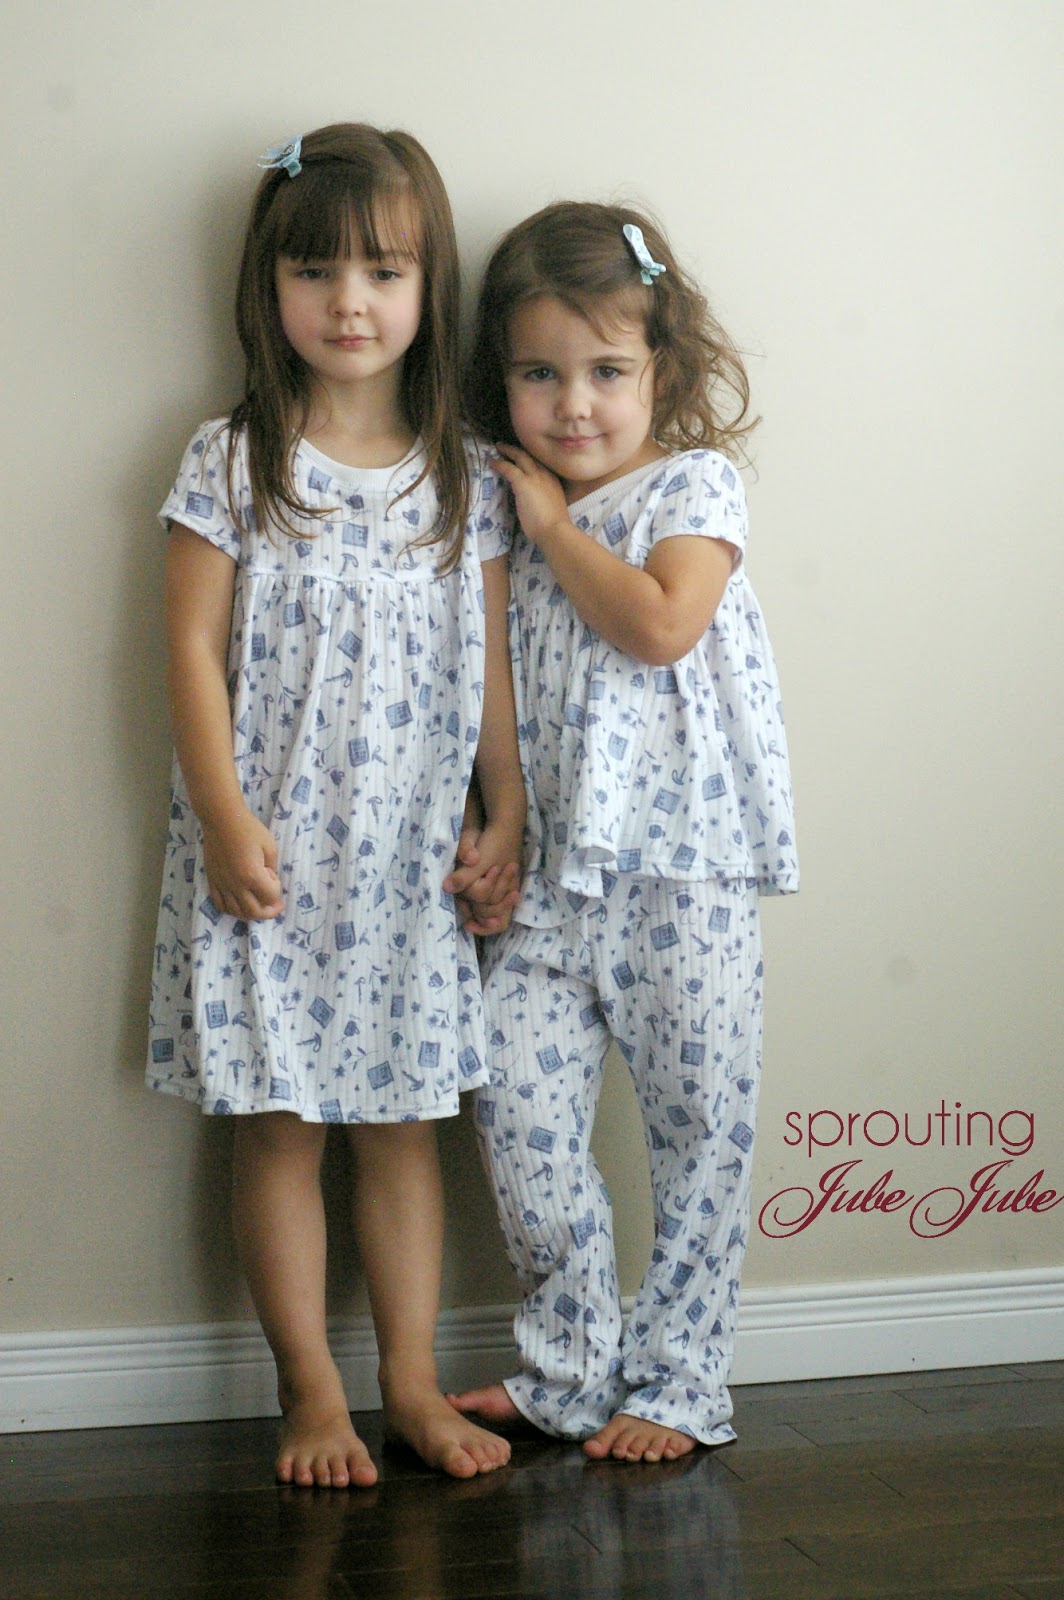 http://sproutingjj.blogspot.ca/2014/09/all-you-need-jammies-heidi-and-finn.html